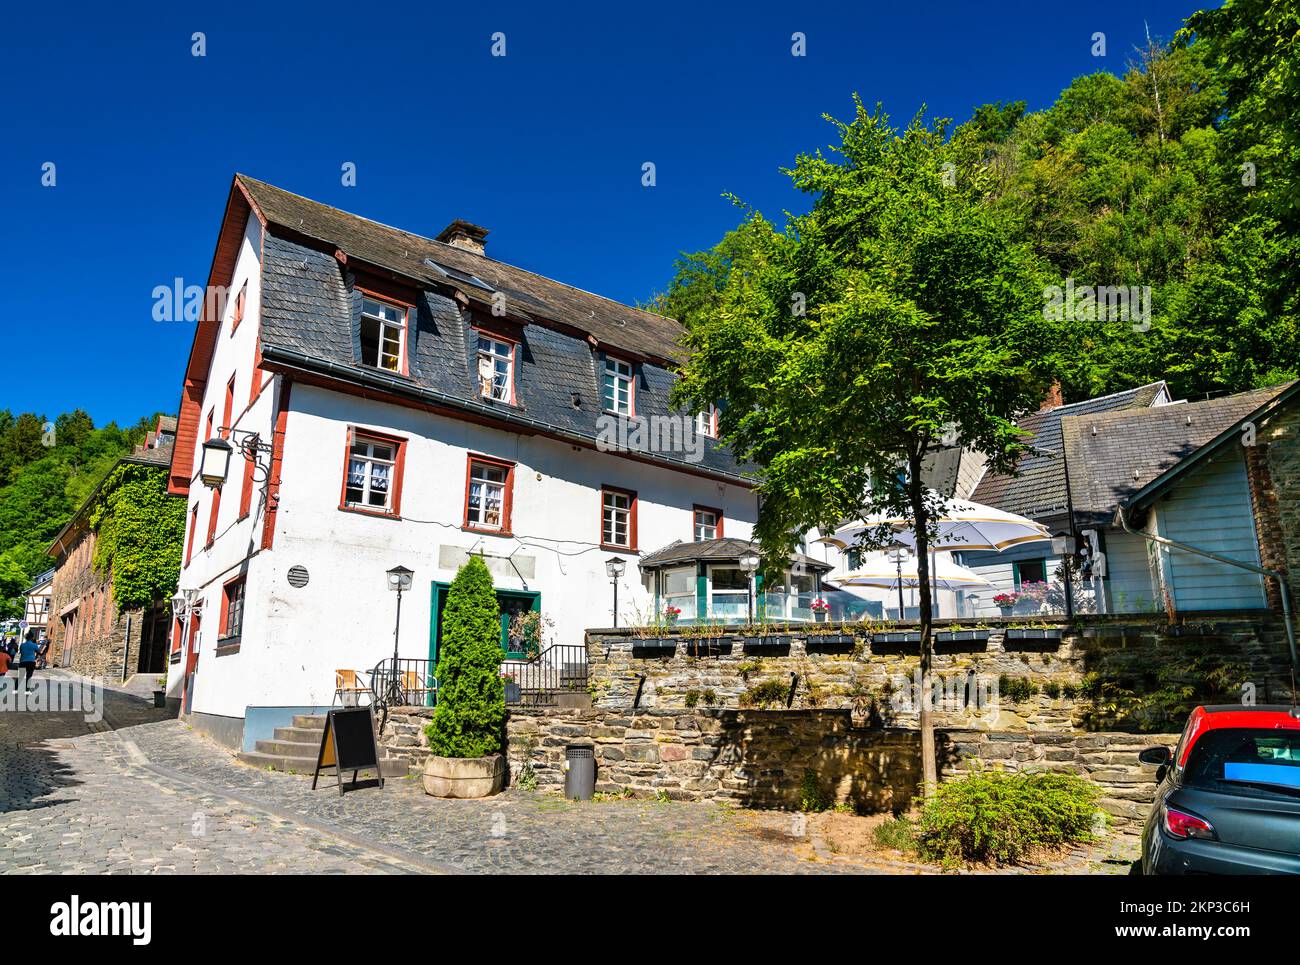 Traditional architecture of Monschau in North Rhine-Westphalia, Germany Stock Photo